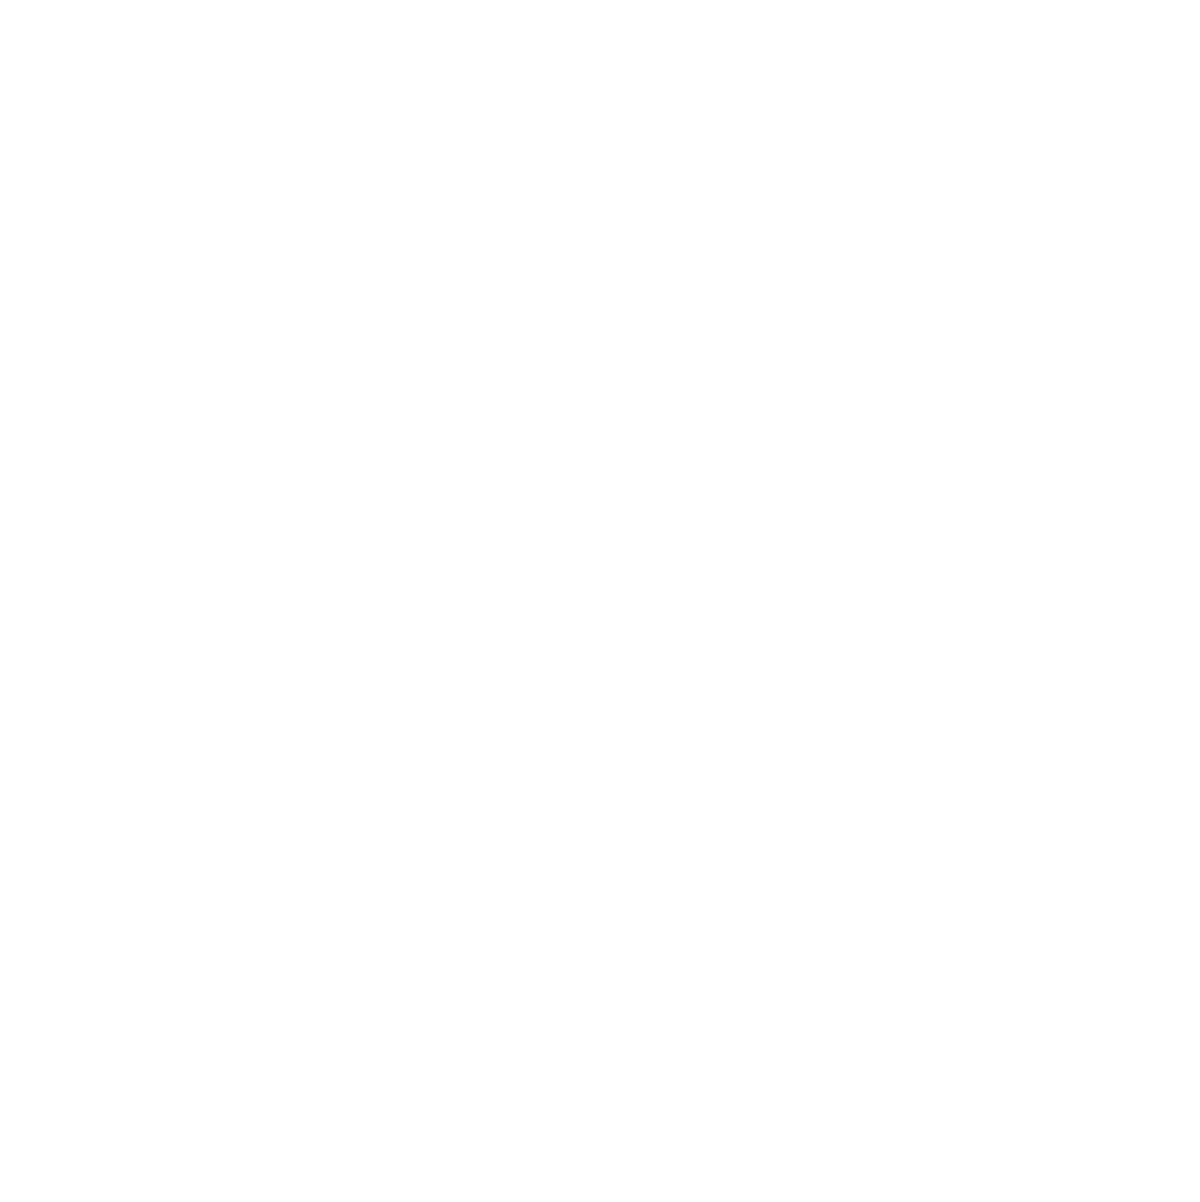 The Bureau of Alcohol, Tobacco, Firearms and Explosives (ATF) logo